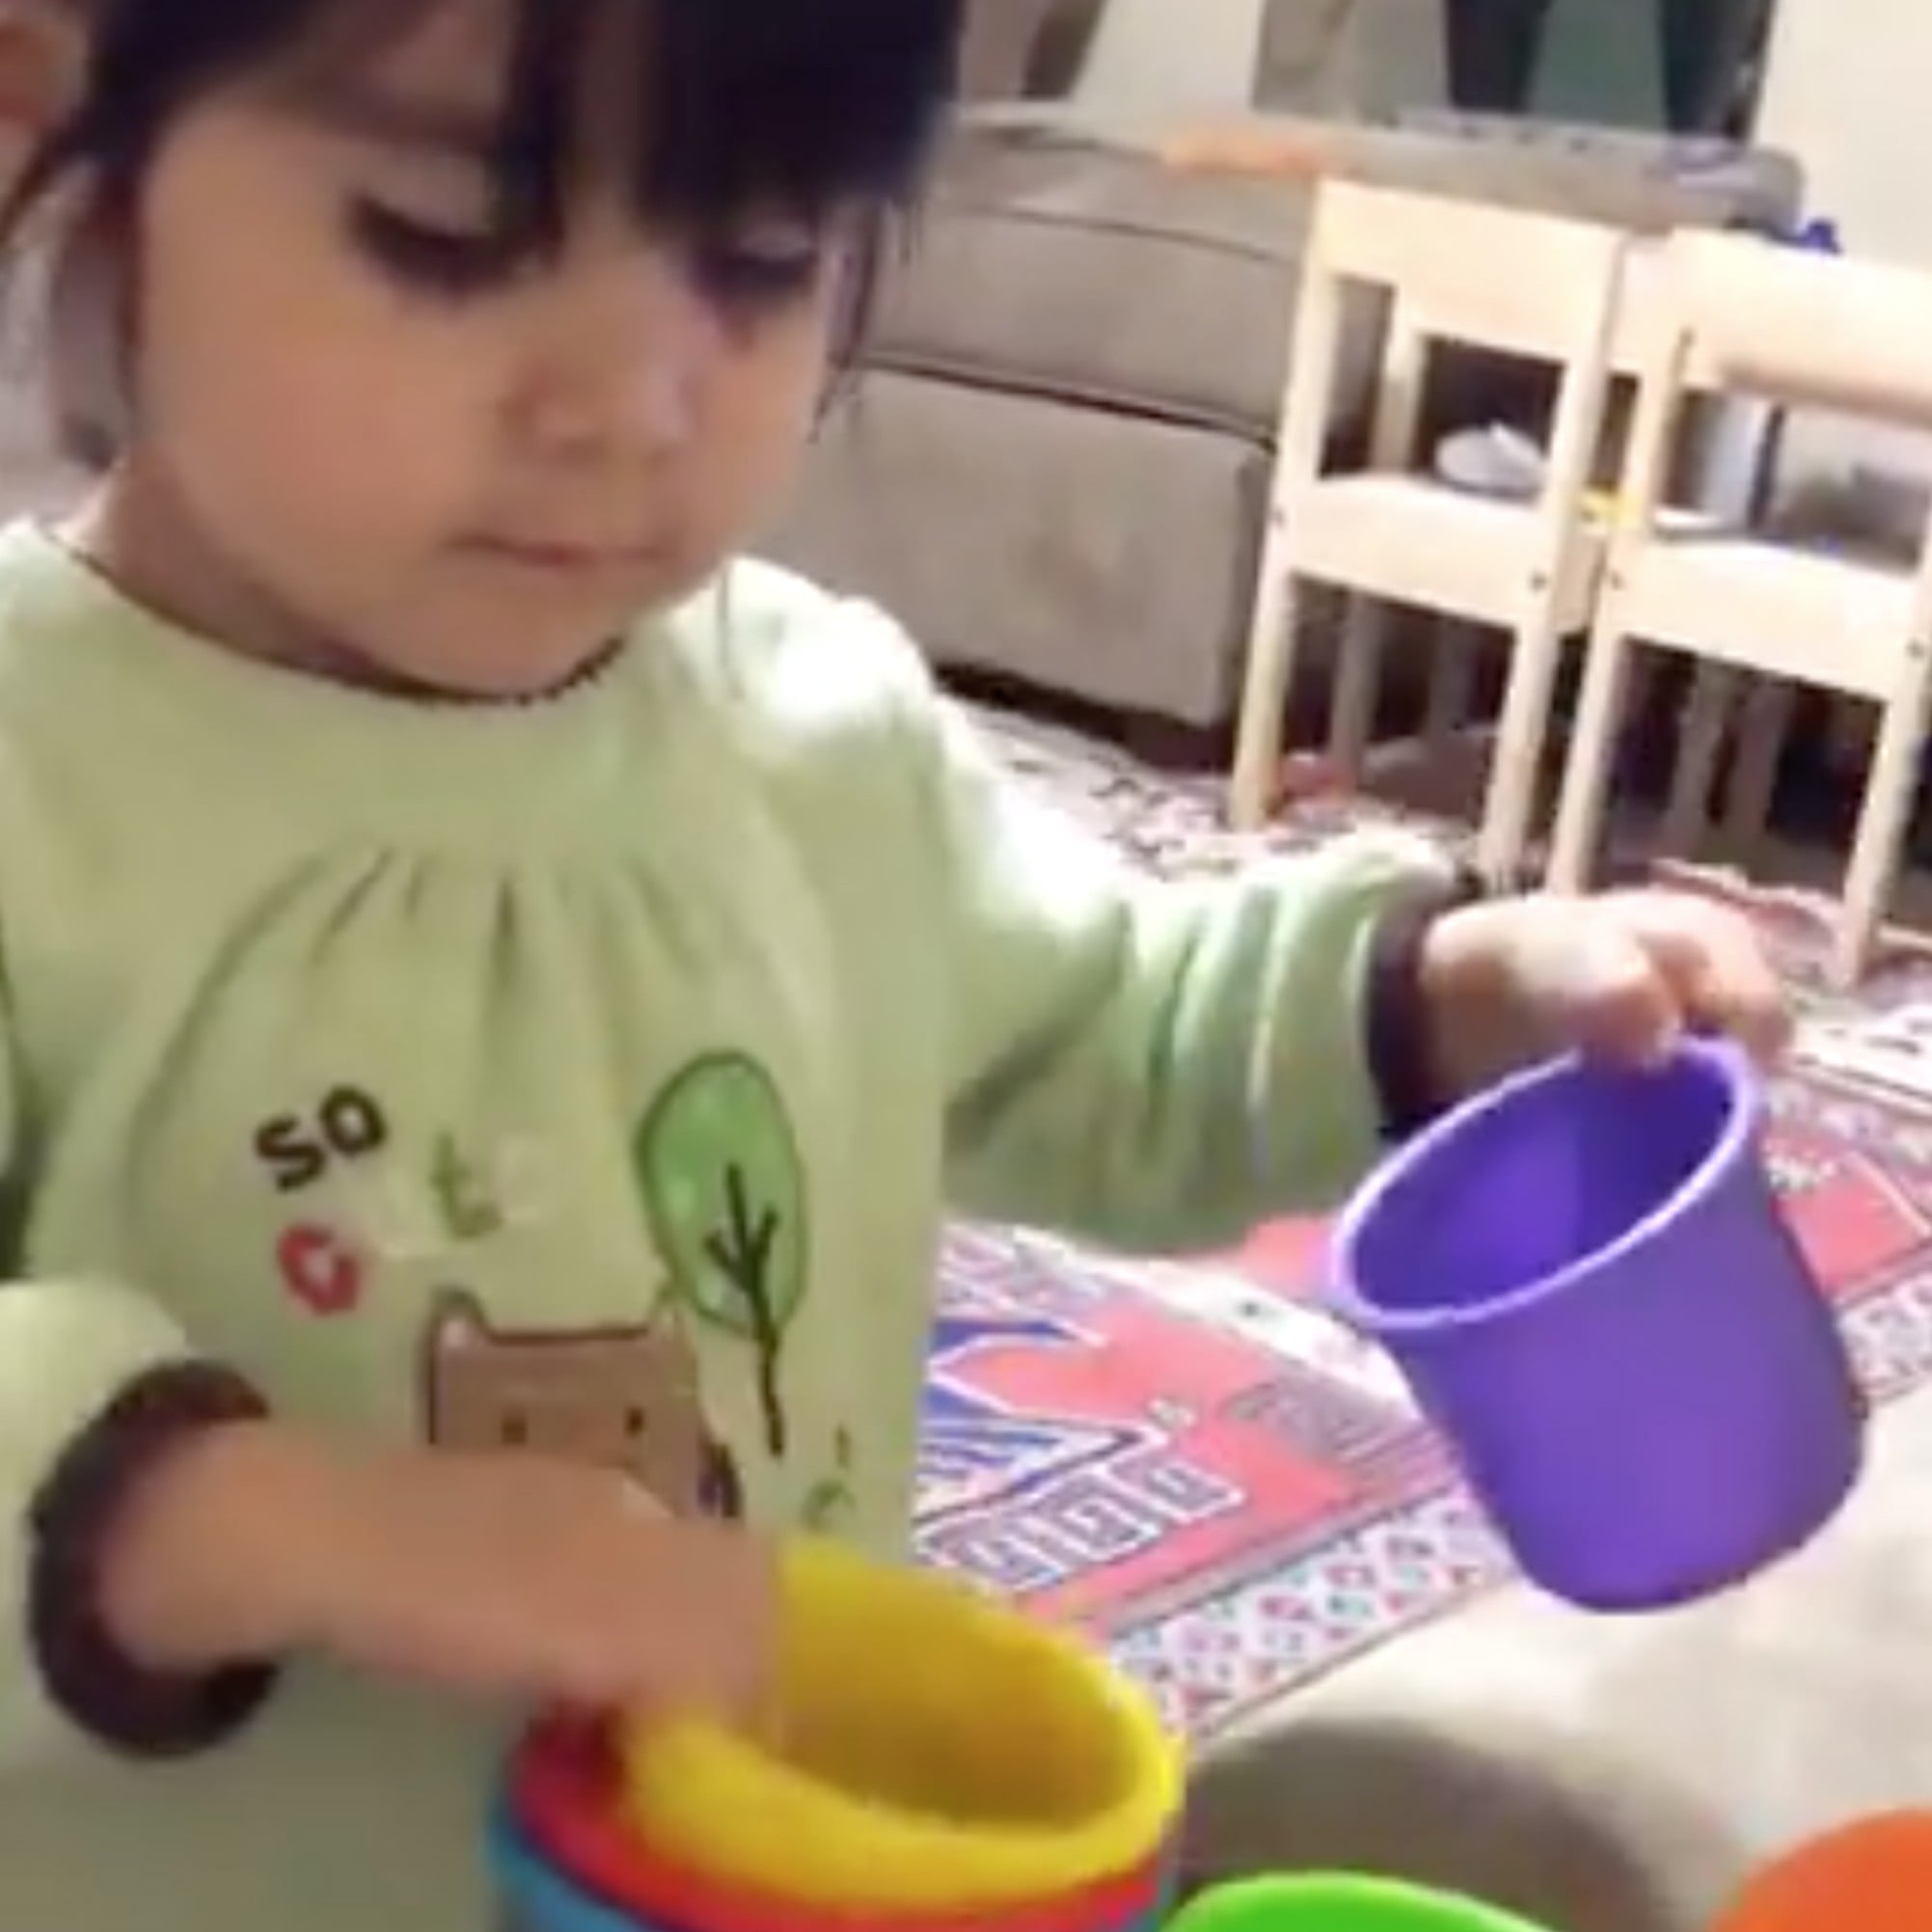 nesting cups for toddlers